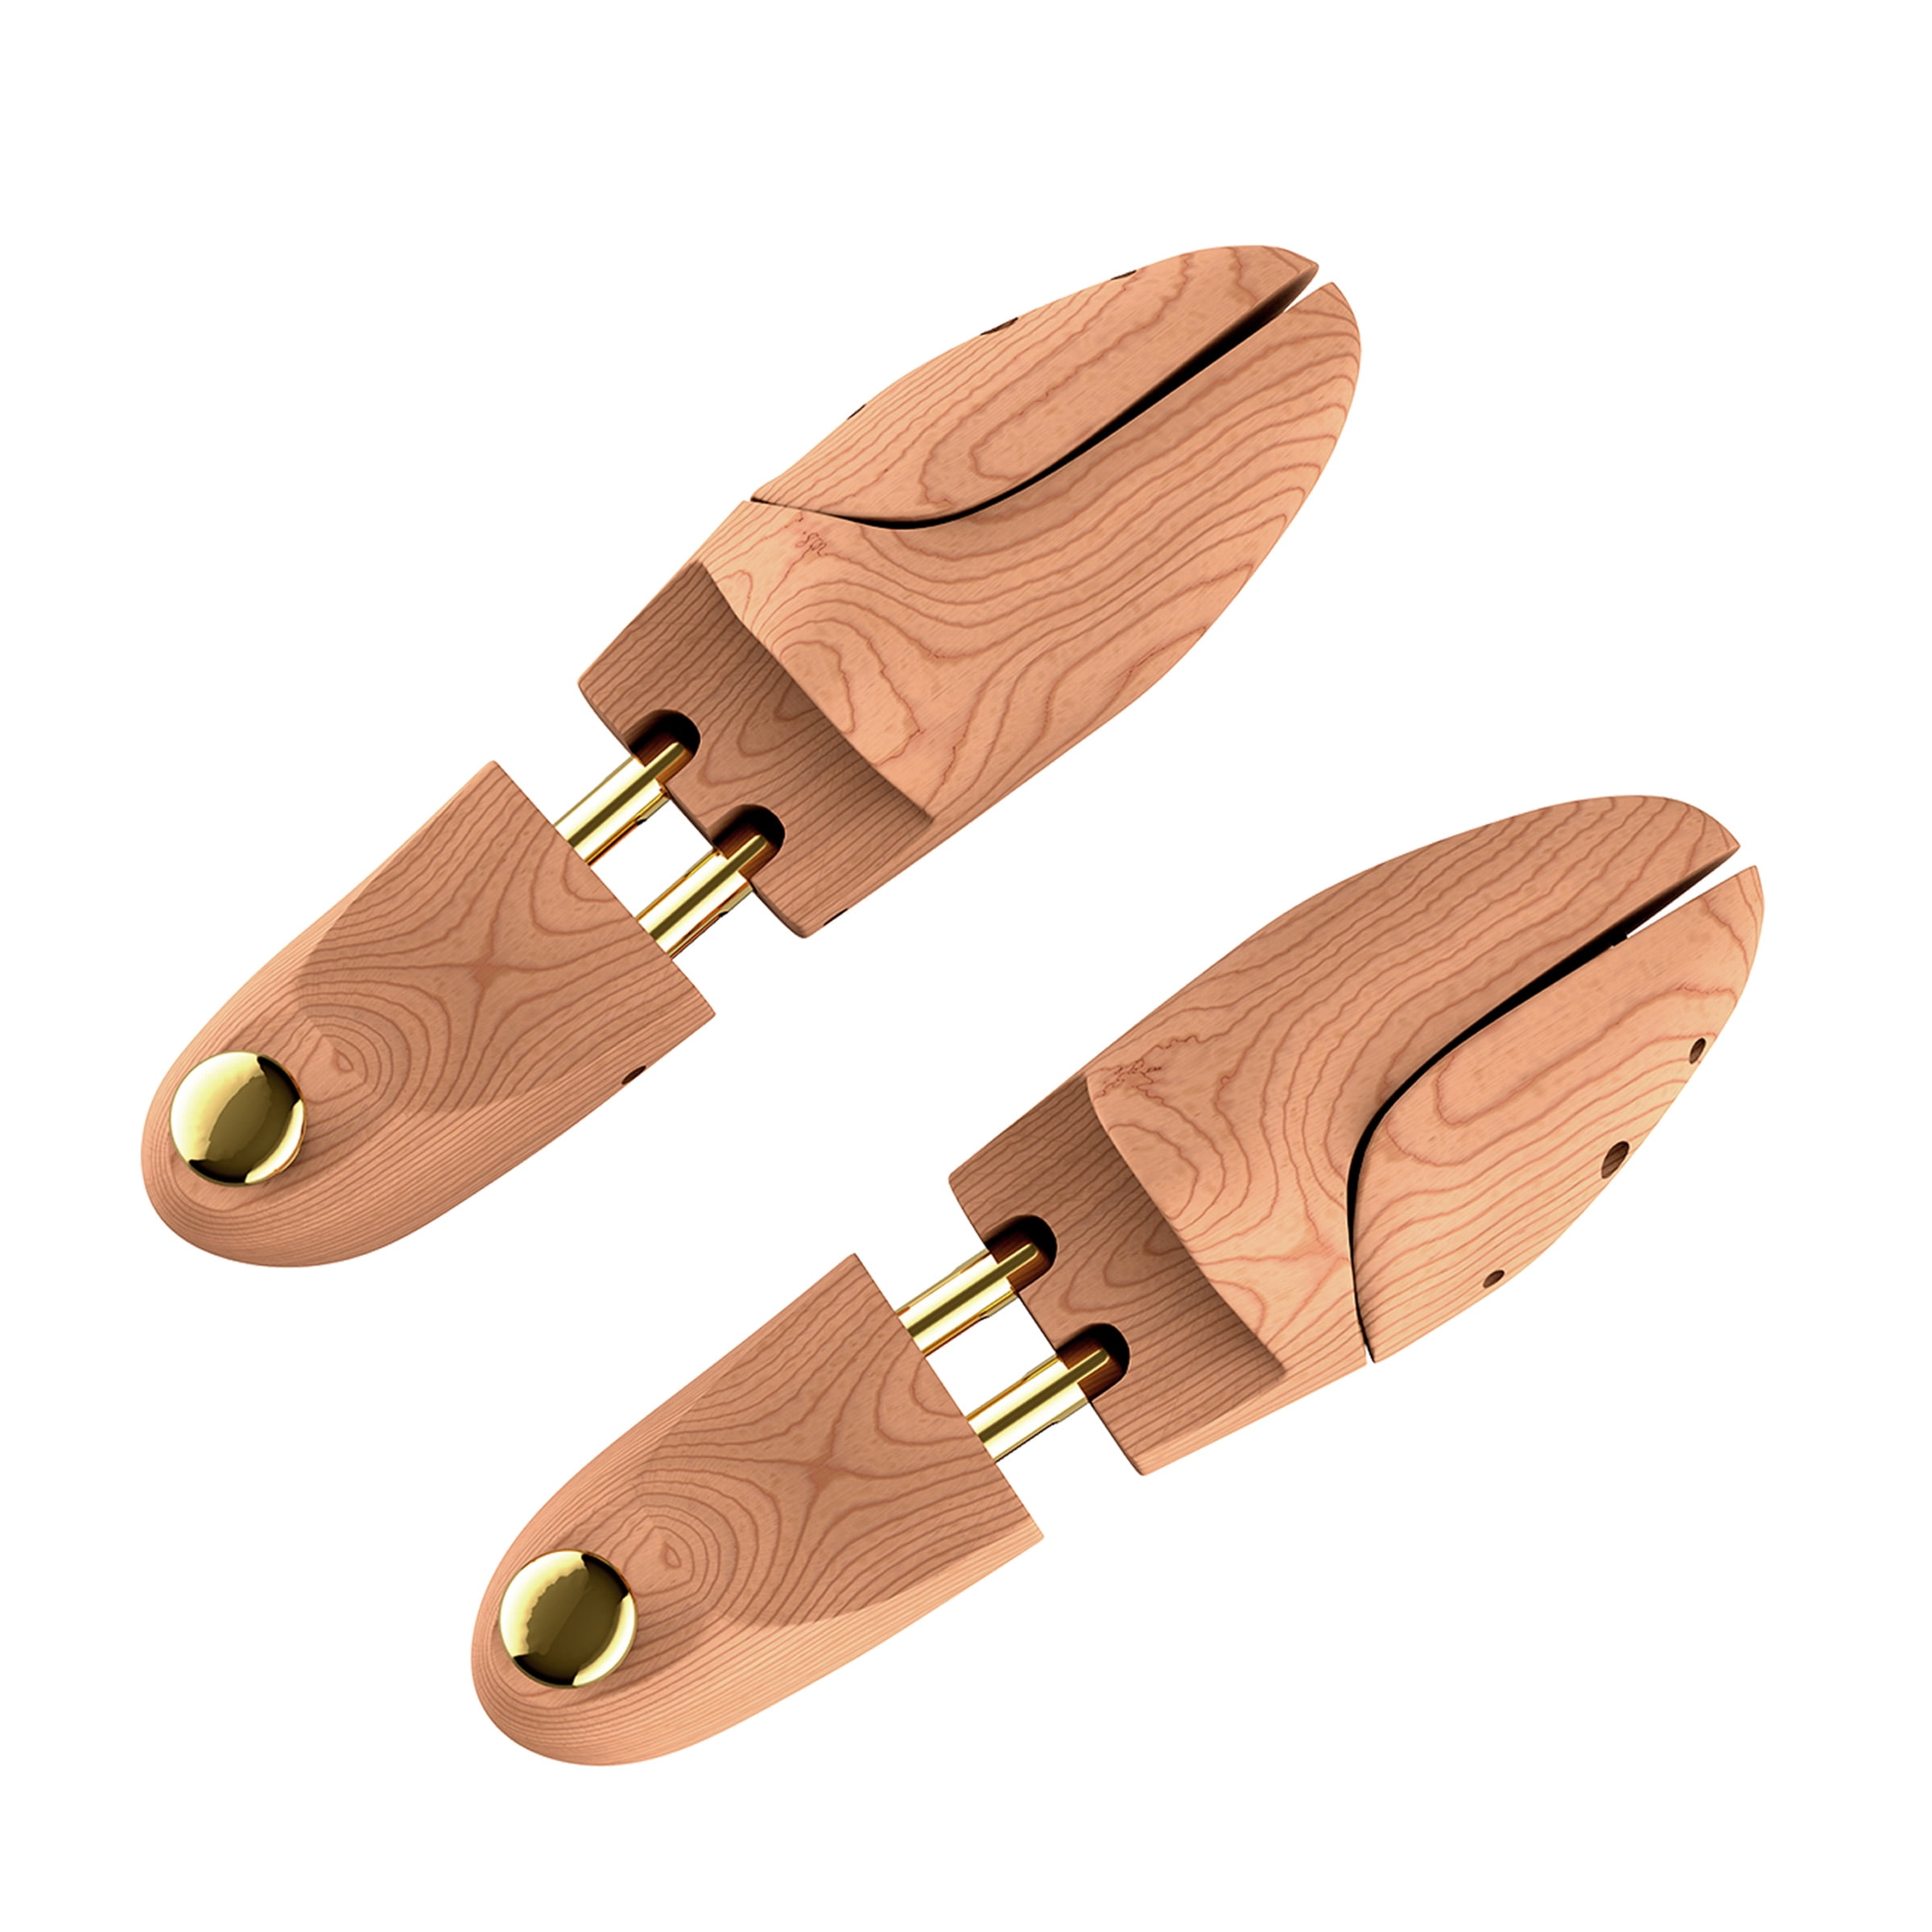 3 in 1 Raxs Two-Way Shoe Stretchers/Shoe Trees Kit 3 Width Expanders for Men & Women Shoes and High Heels Shoes Widener Shaper for Whole Family Size EU 35 – 45, UK 3-10.5 